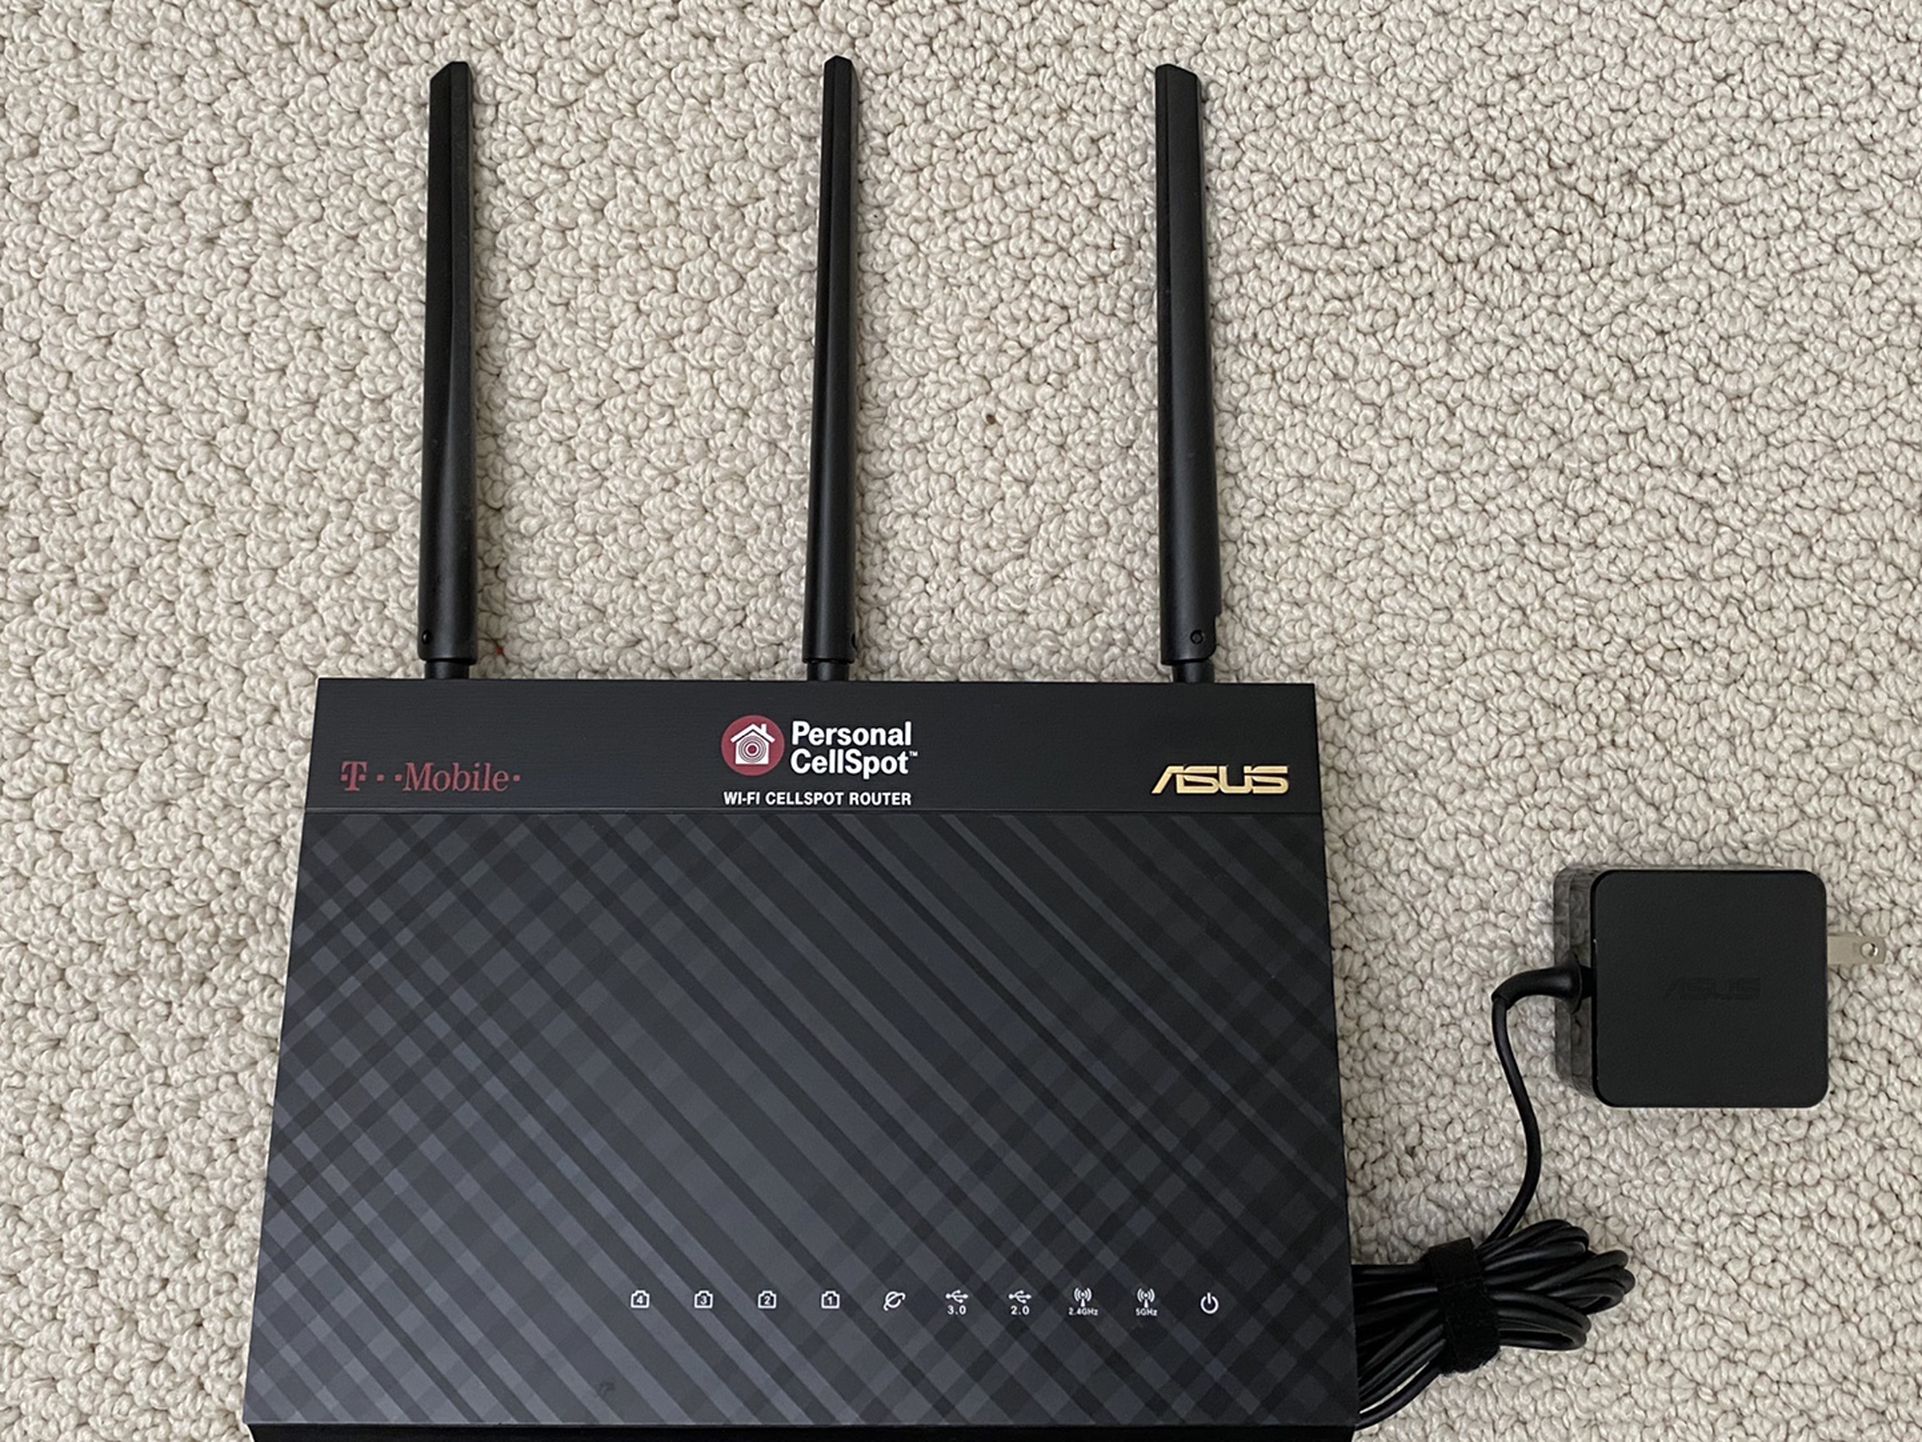 Asus AC1900 Dual-Band Gigabit Router (T-Mobile Wi-Fi CellSpot)